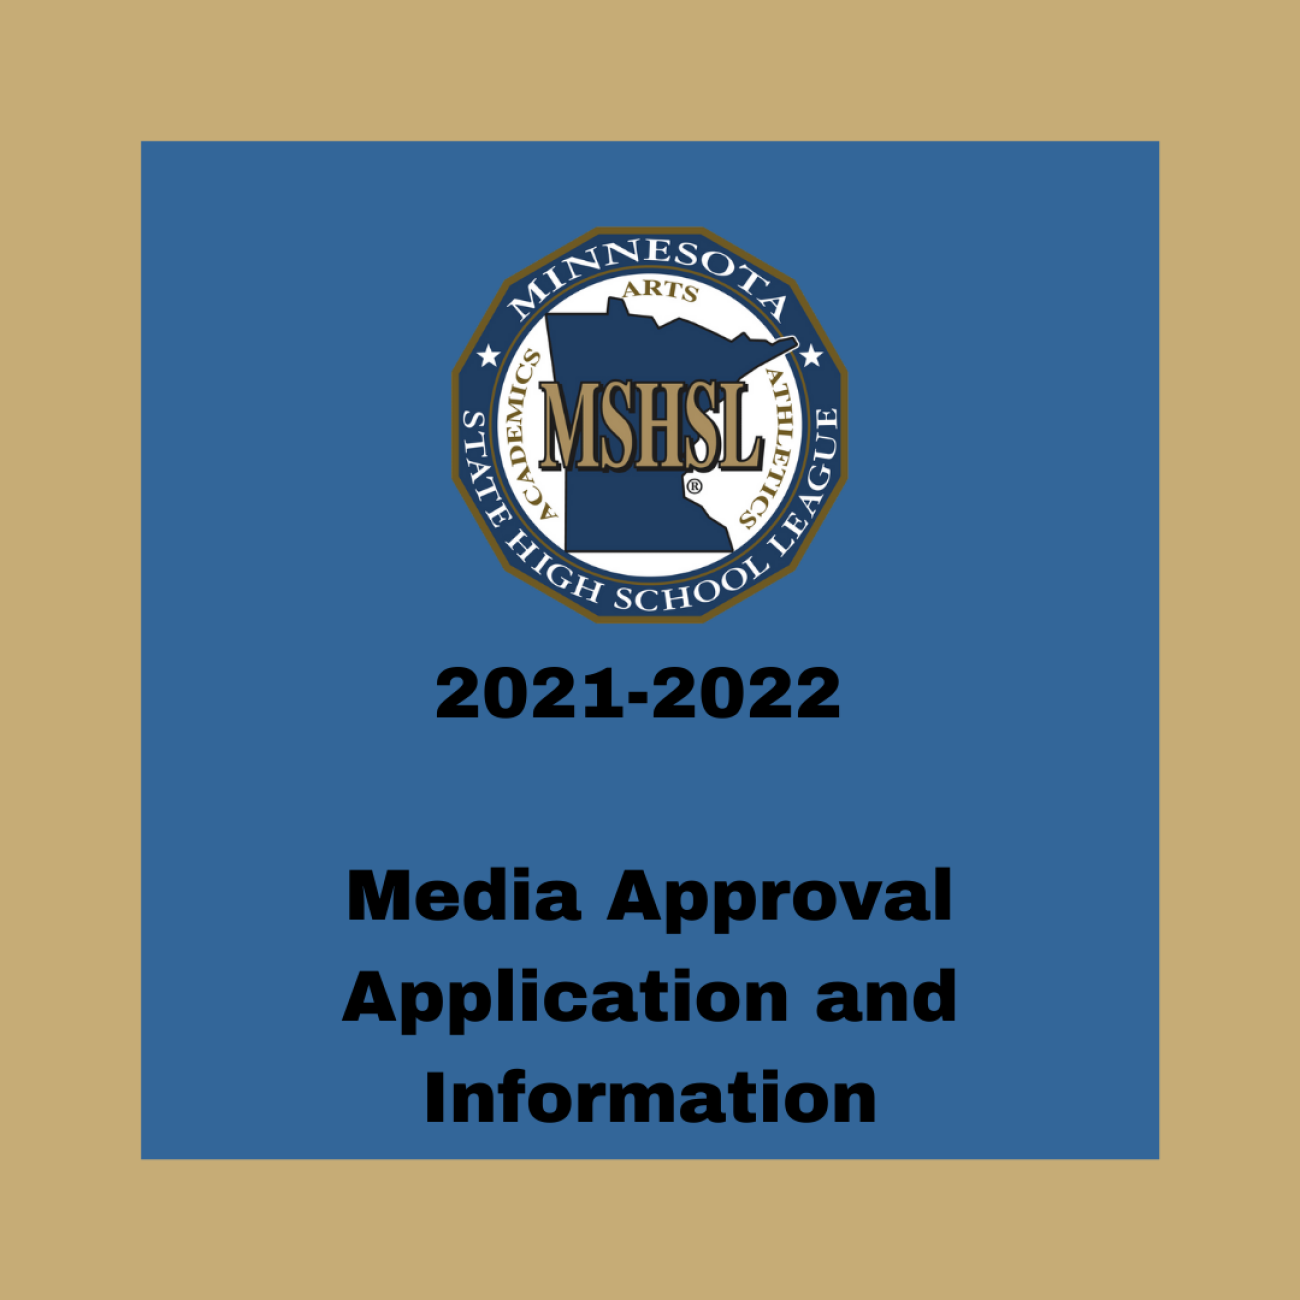 Media Approval Application and Information